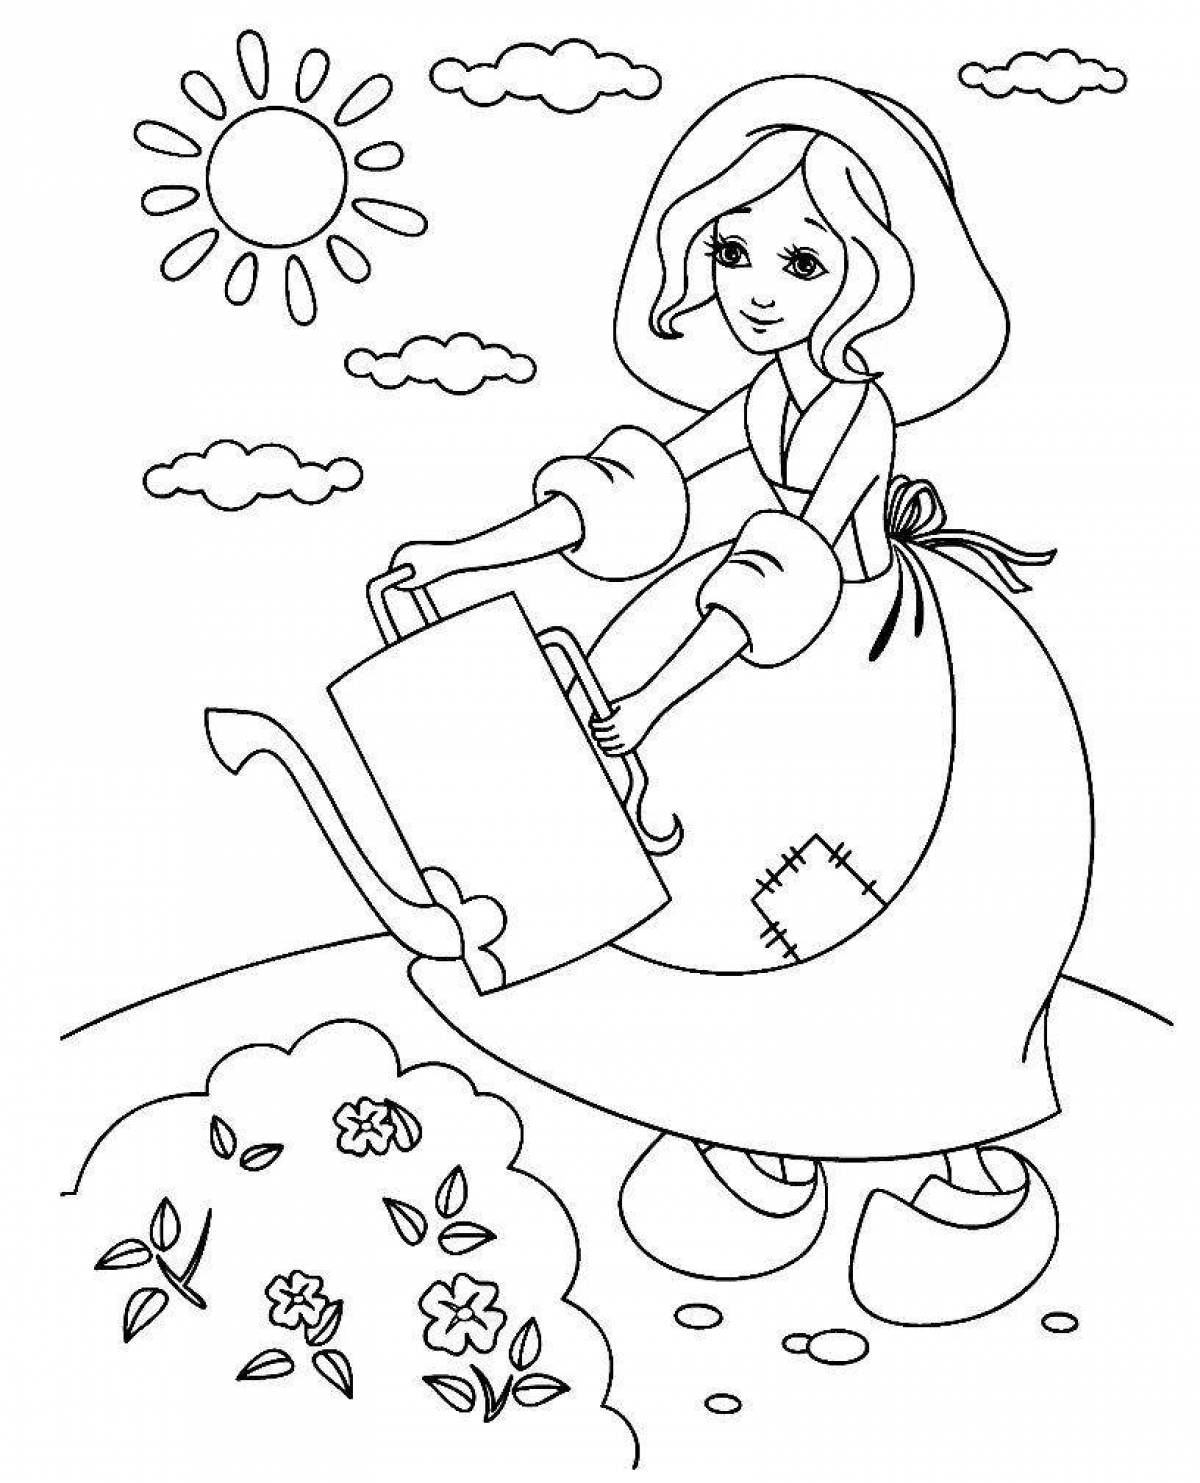 Playful Soviet coloring book for kids